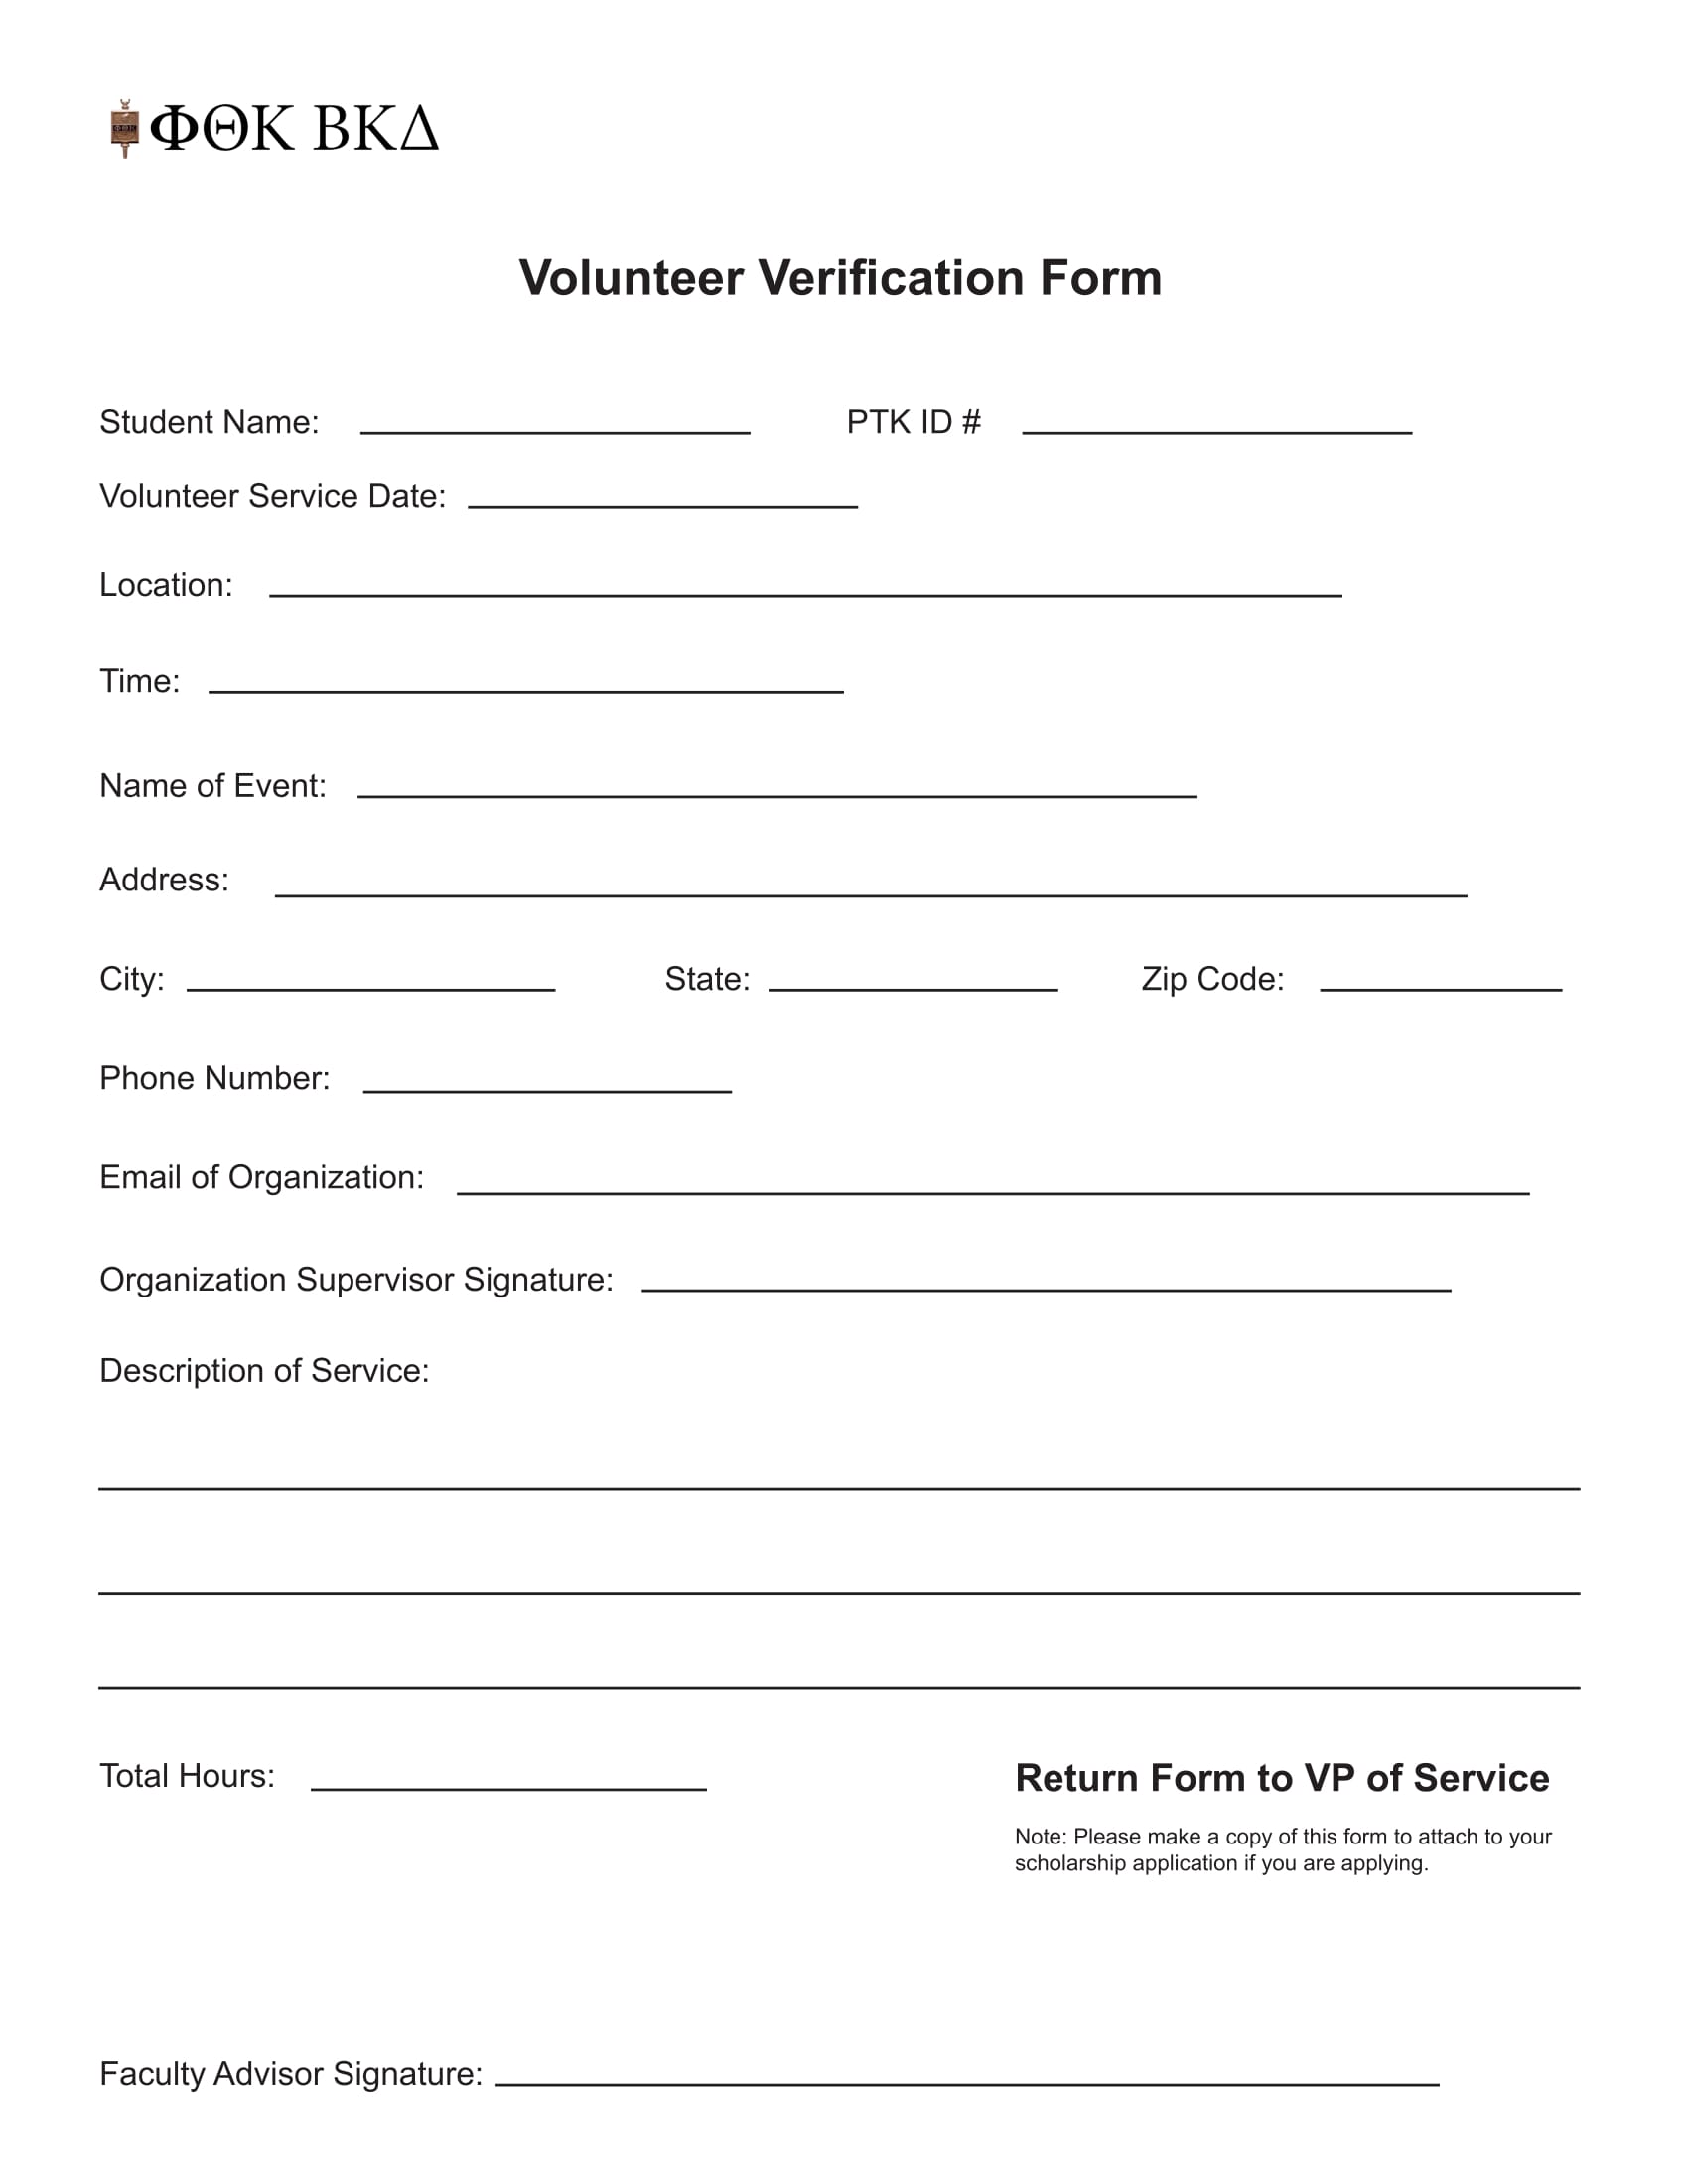 Free downloadable templates of volunteer forms